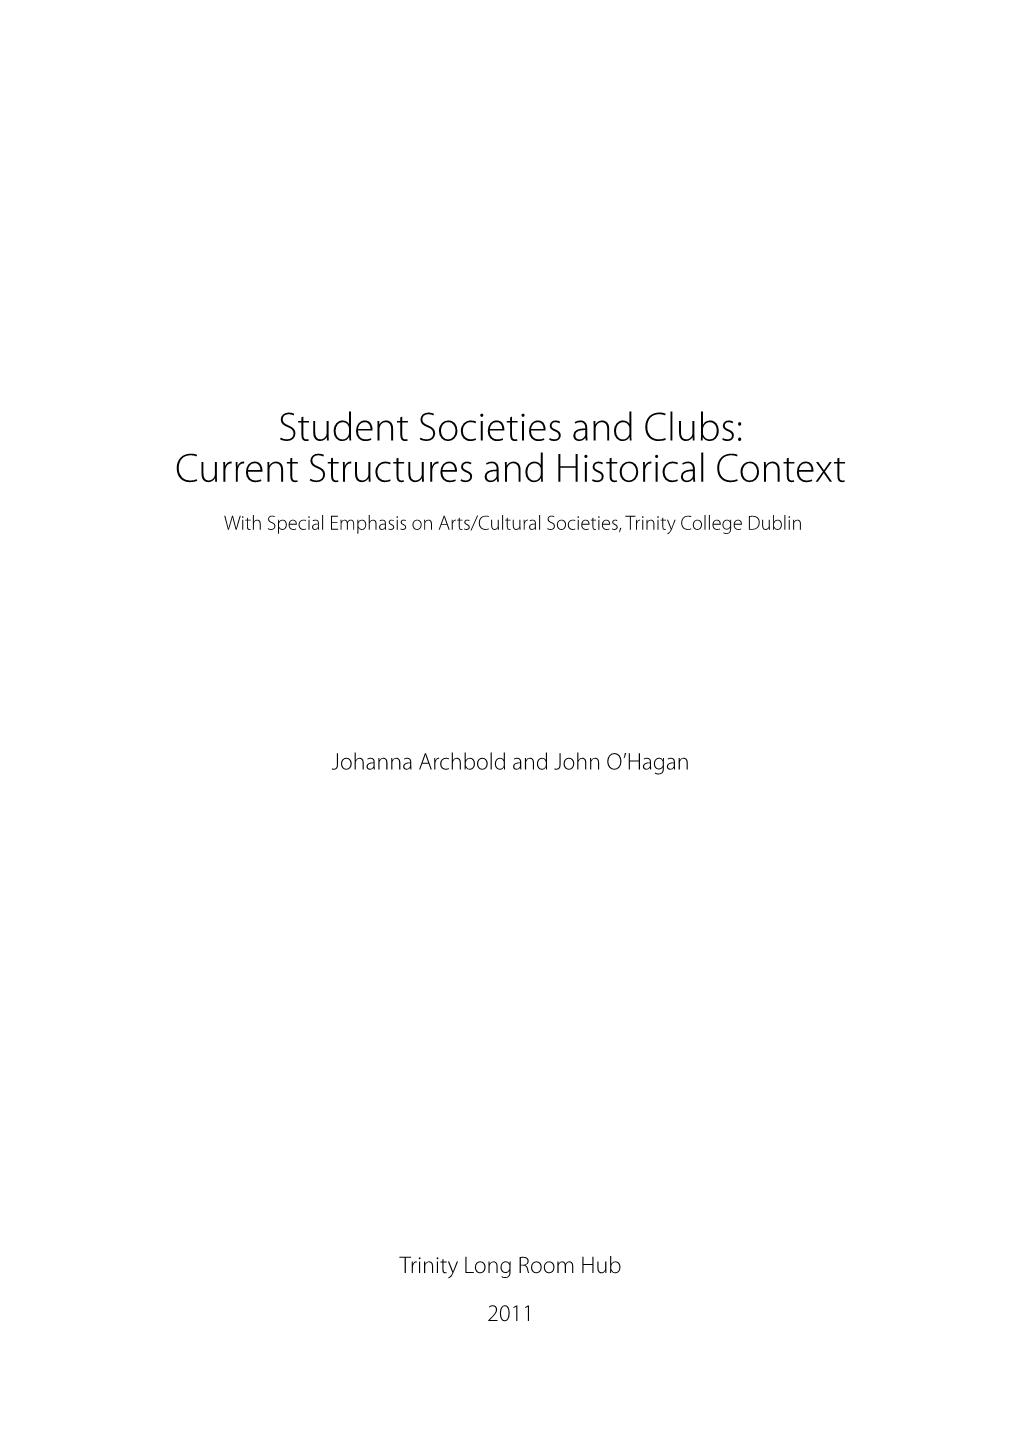 Student Societies and Clubs: Current Structures and Historical Context